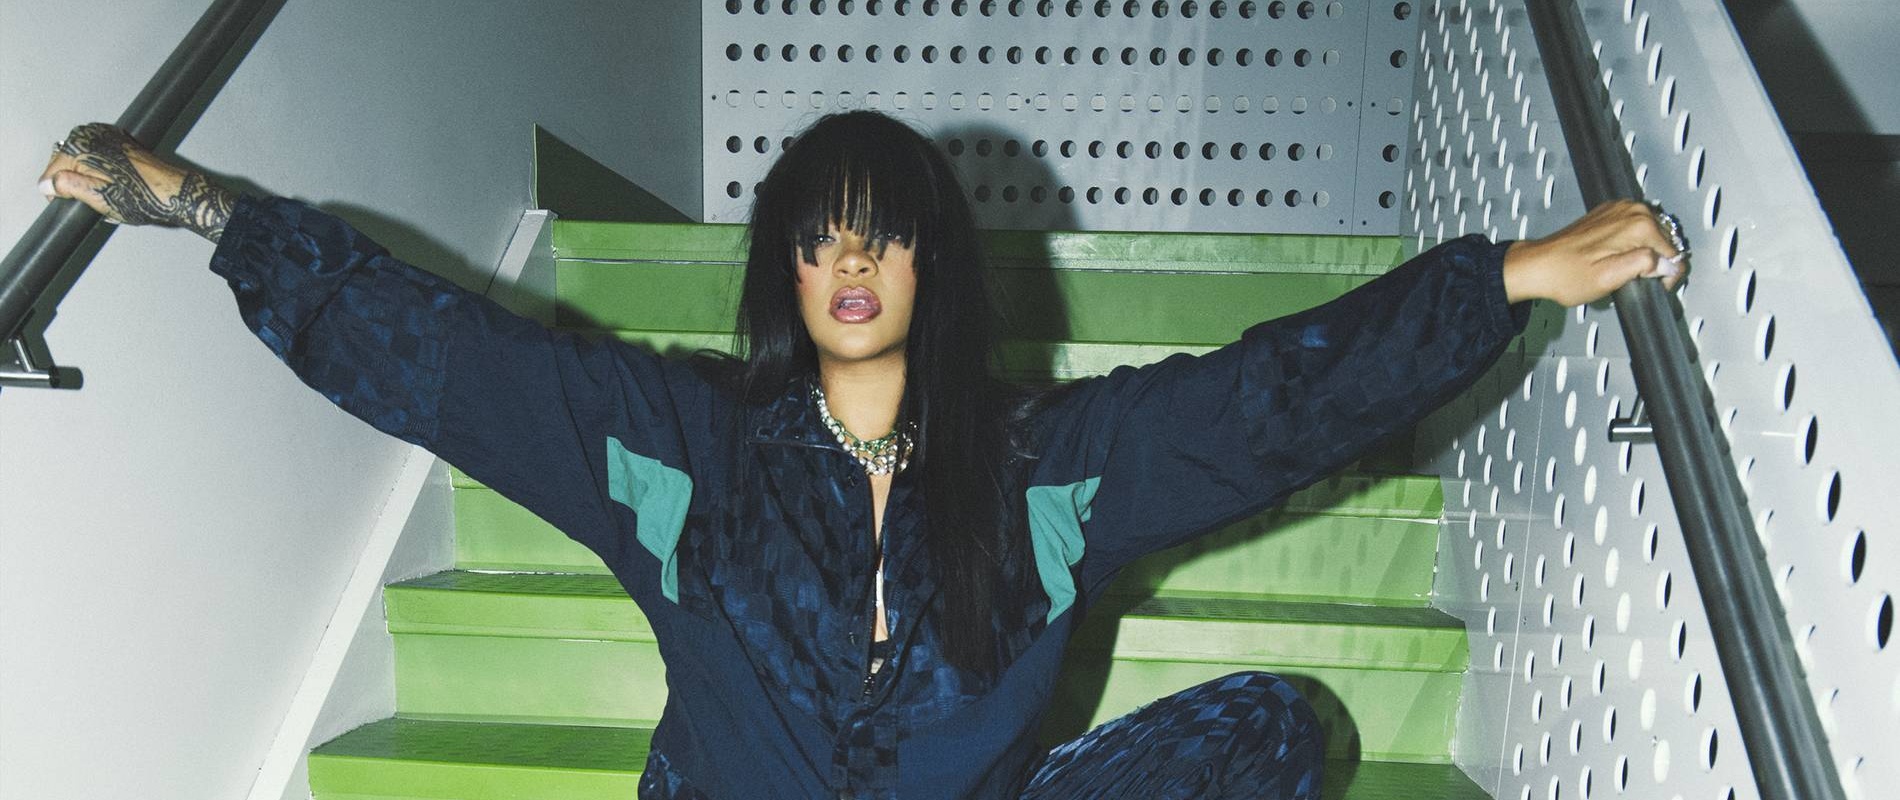 Savage x Fenty Launches Soccer-Inspired Collection With Jerseys, More